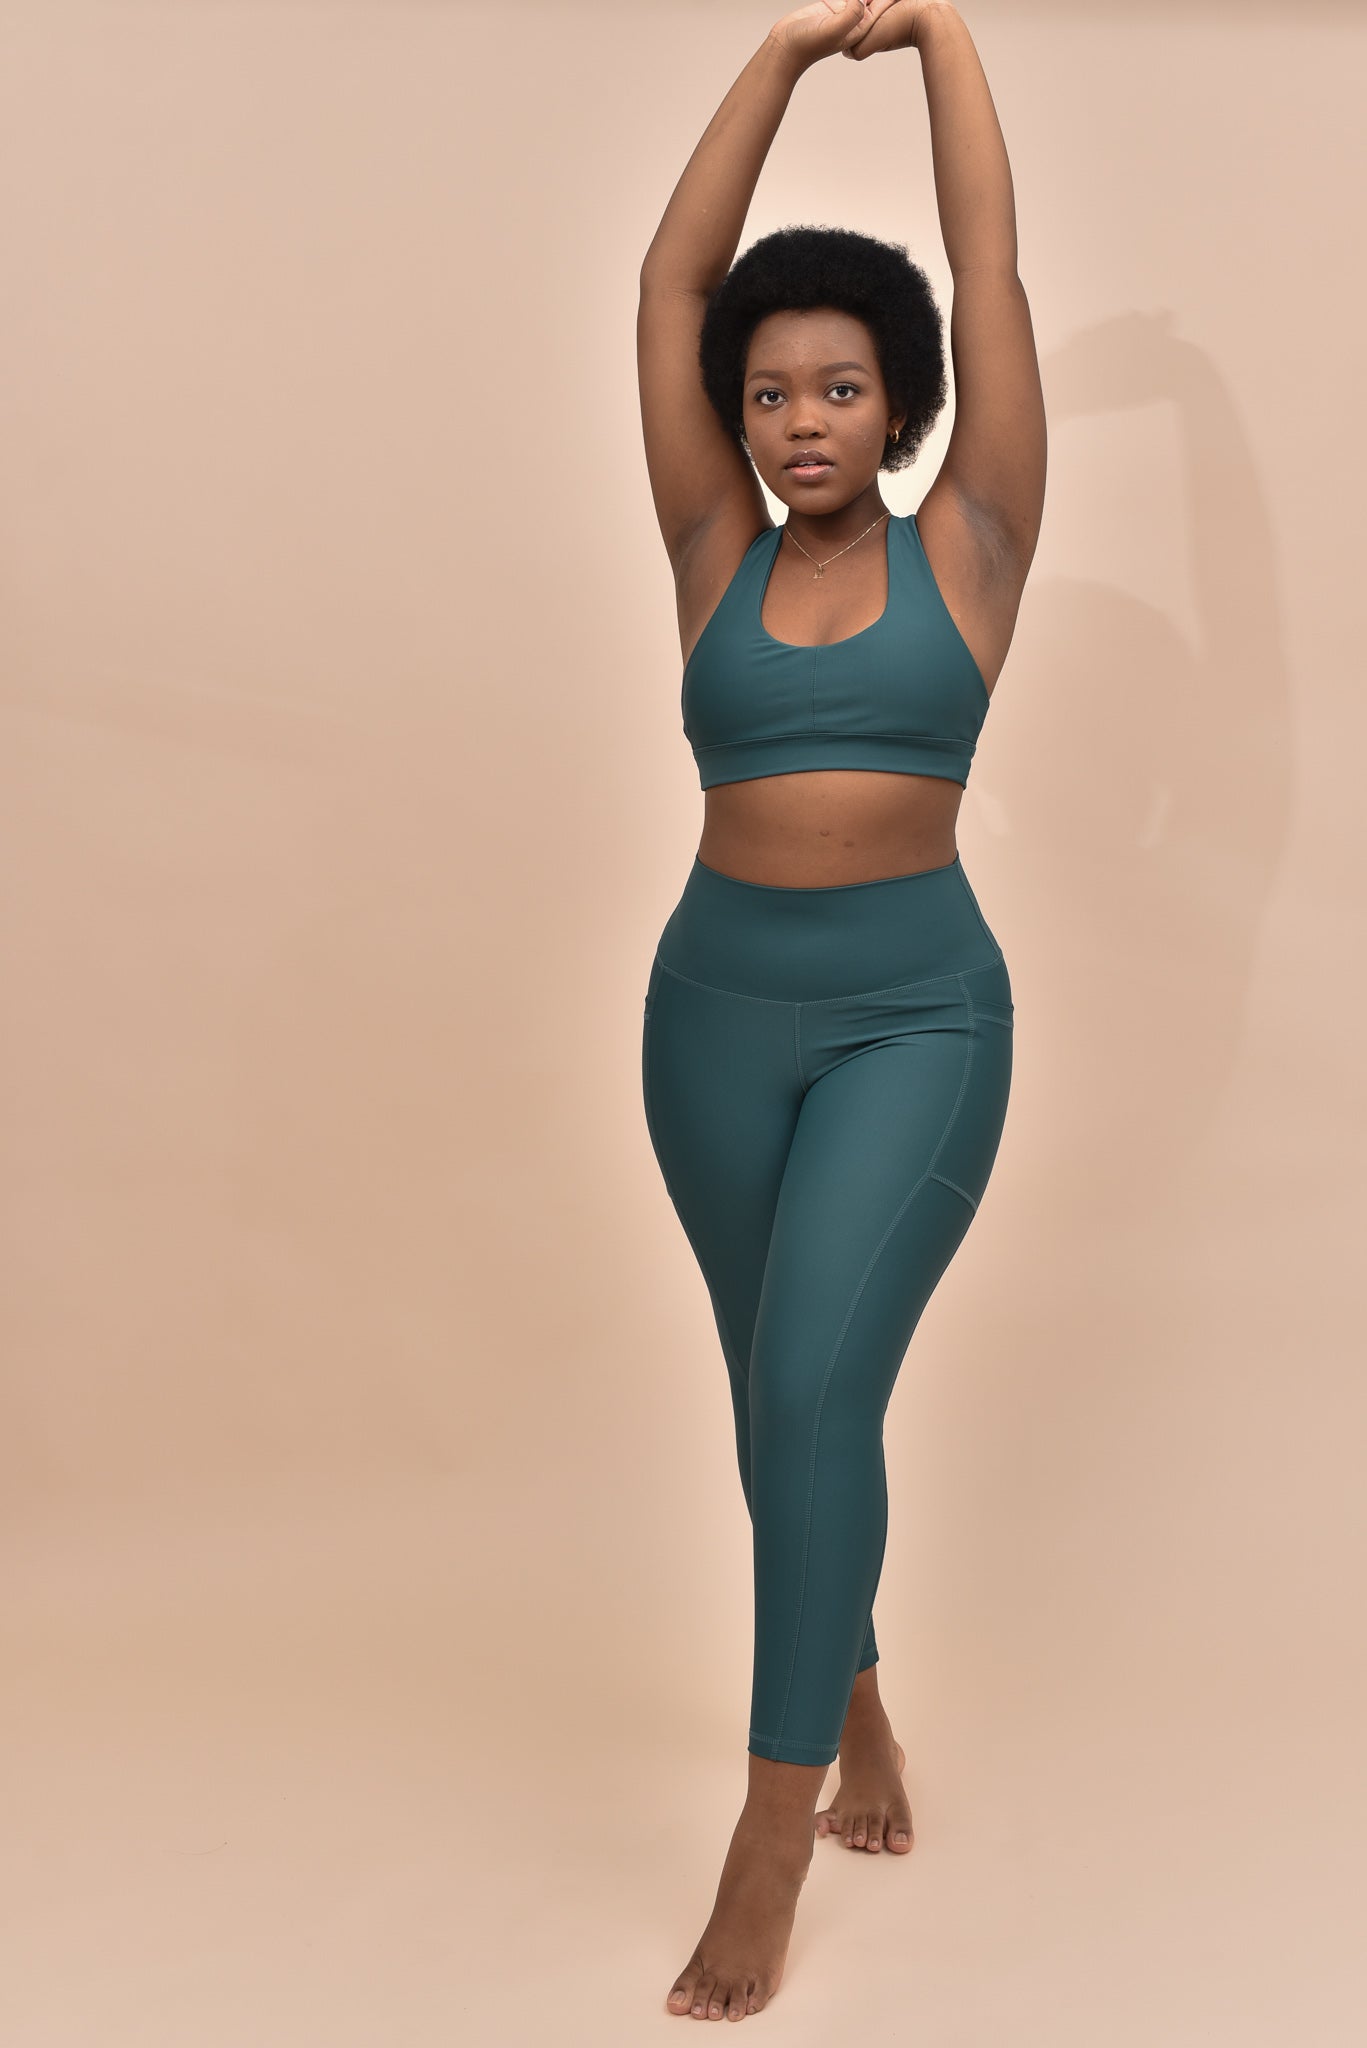 New Kathy / New Mix dark teal, summer-weight leggings are seamless, chic,  and a must-have for every wardrobe. These lightweight, full-length leggings  are versatile, perfect for layering, and available in many shades.